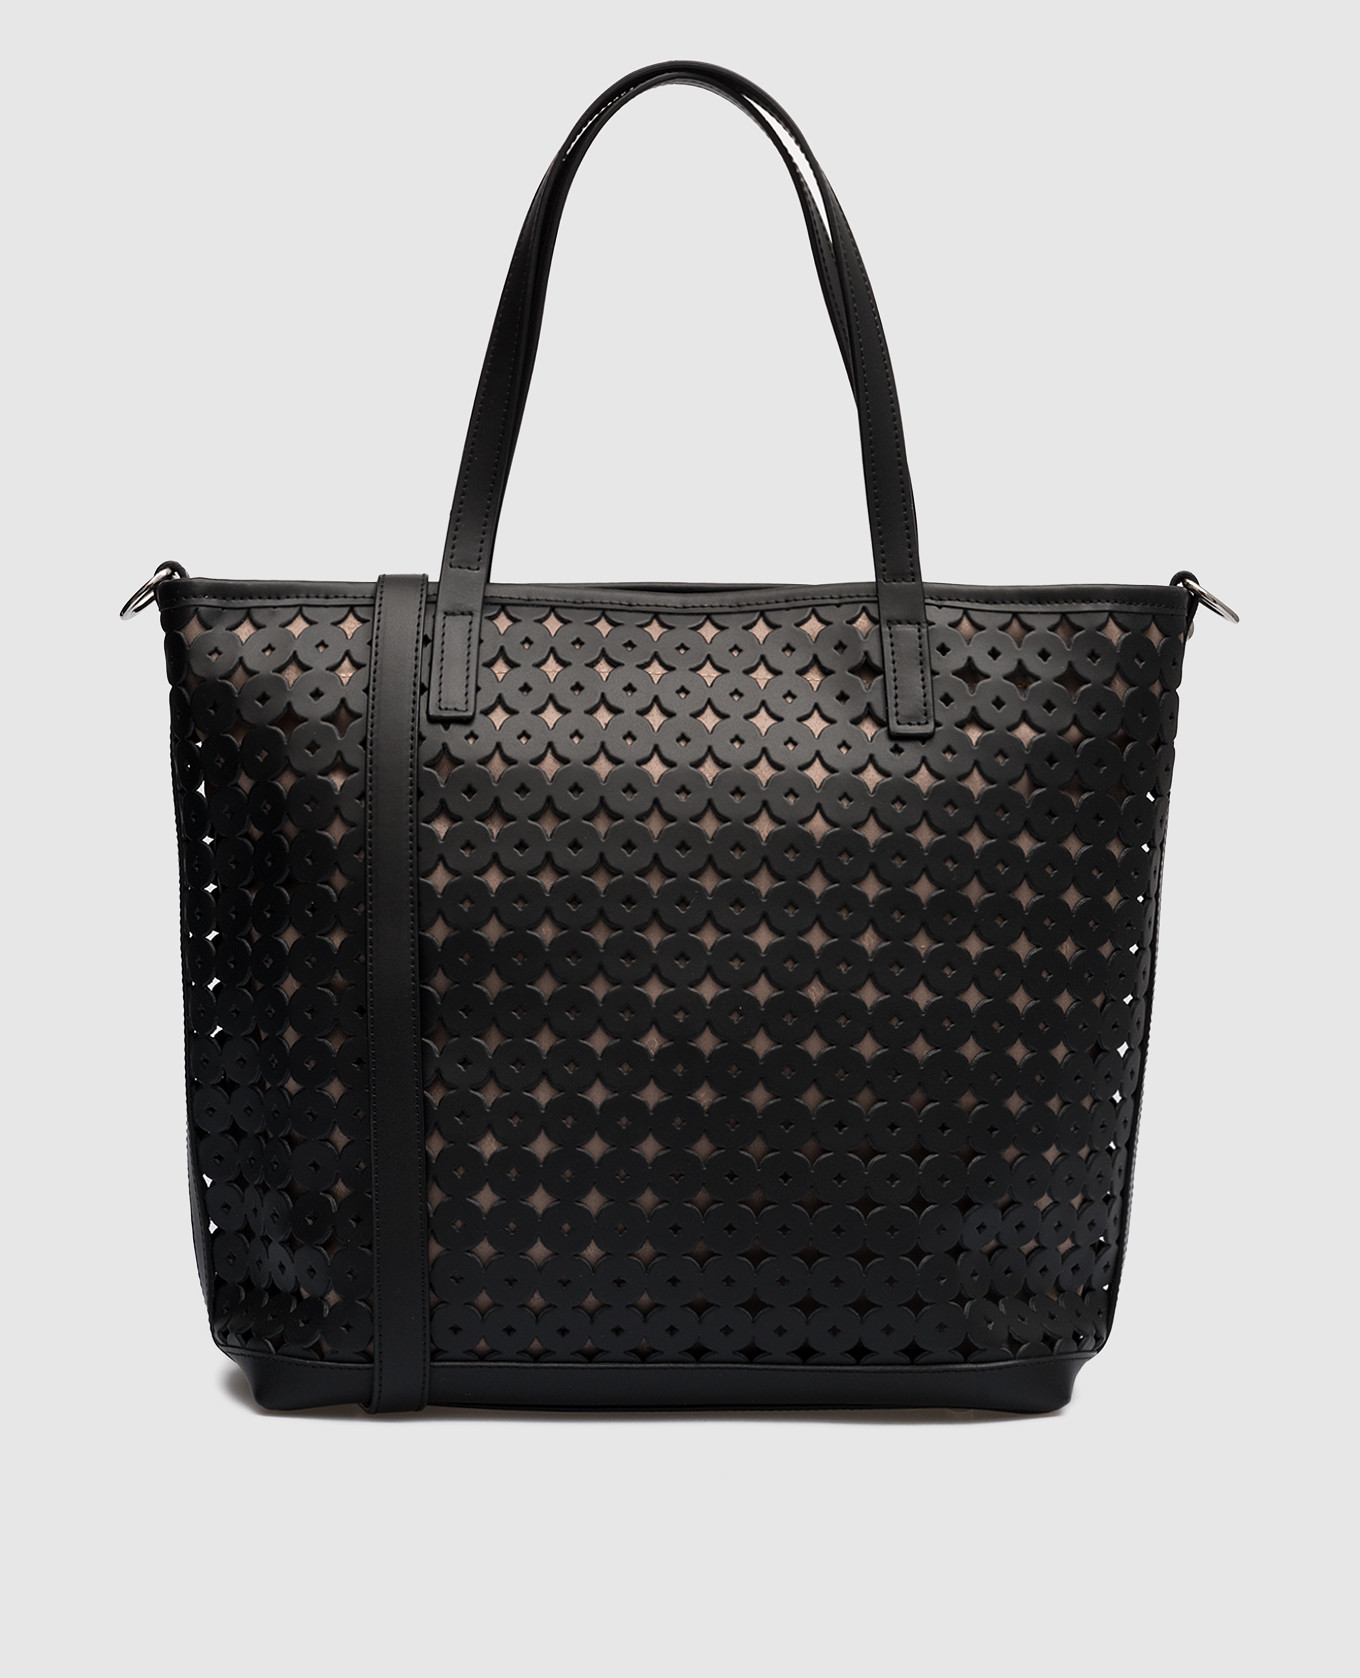 Black leather tote bag with perforation